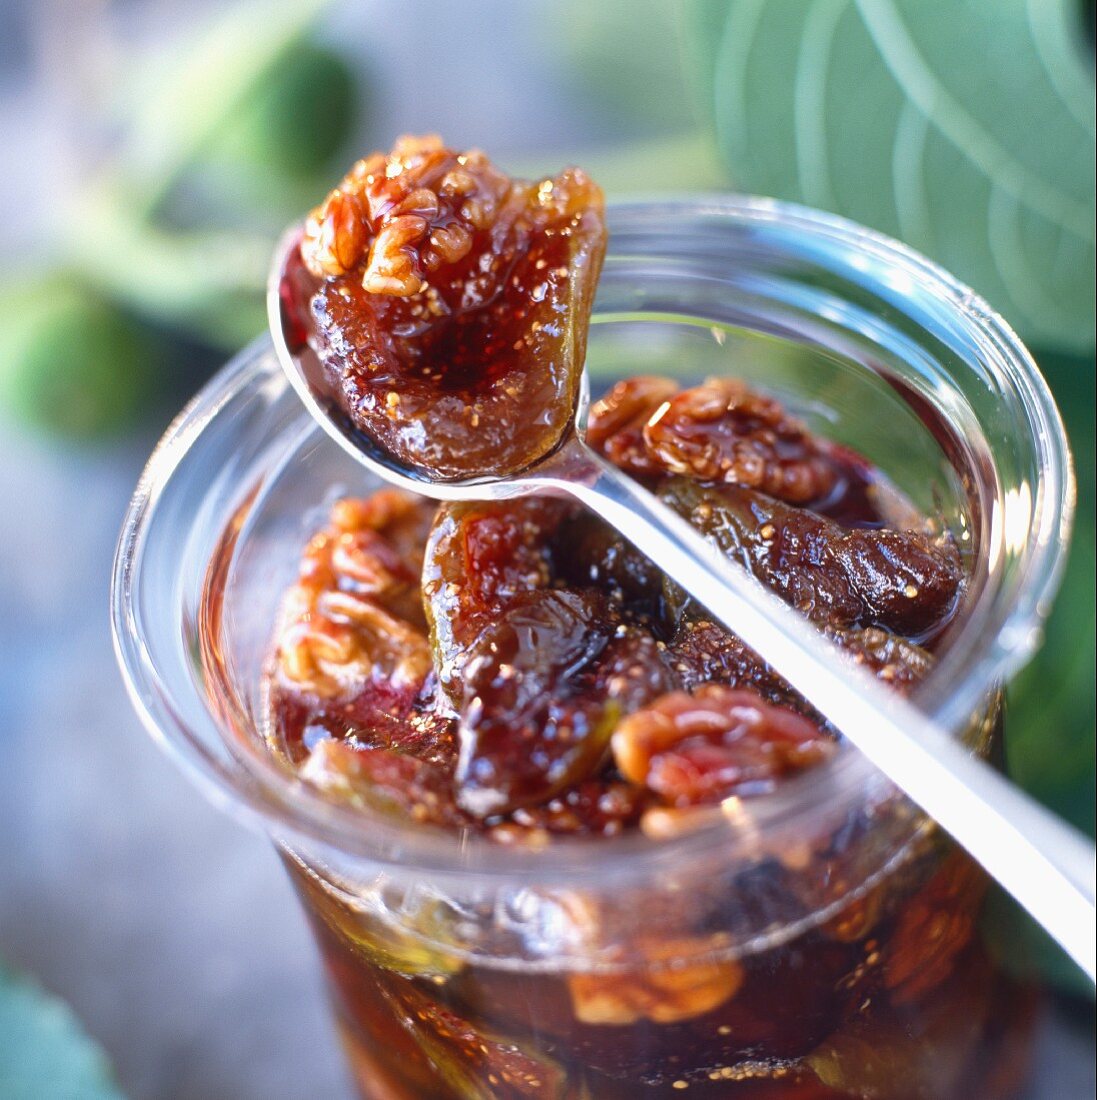 Walnut and fig jam(topic: figs)